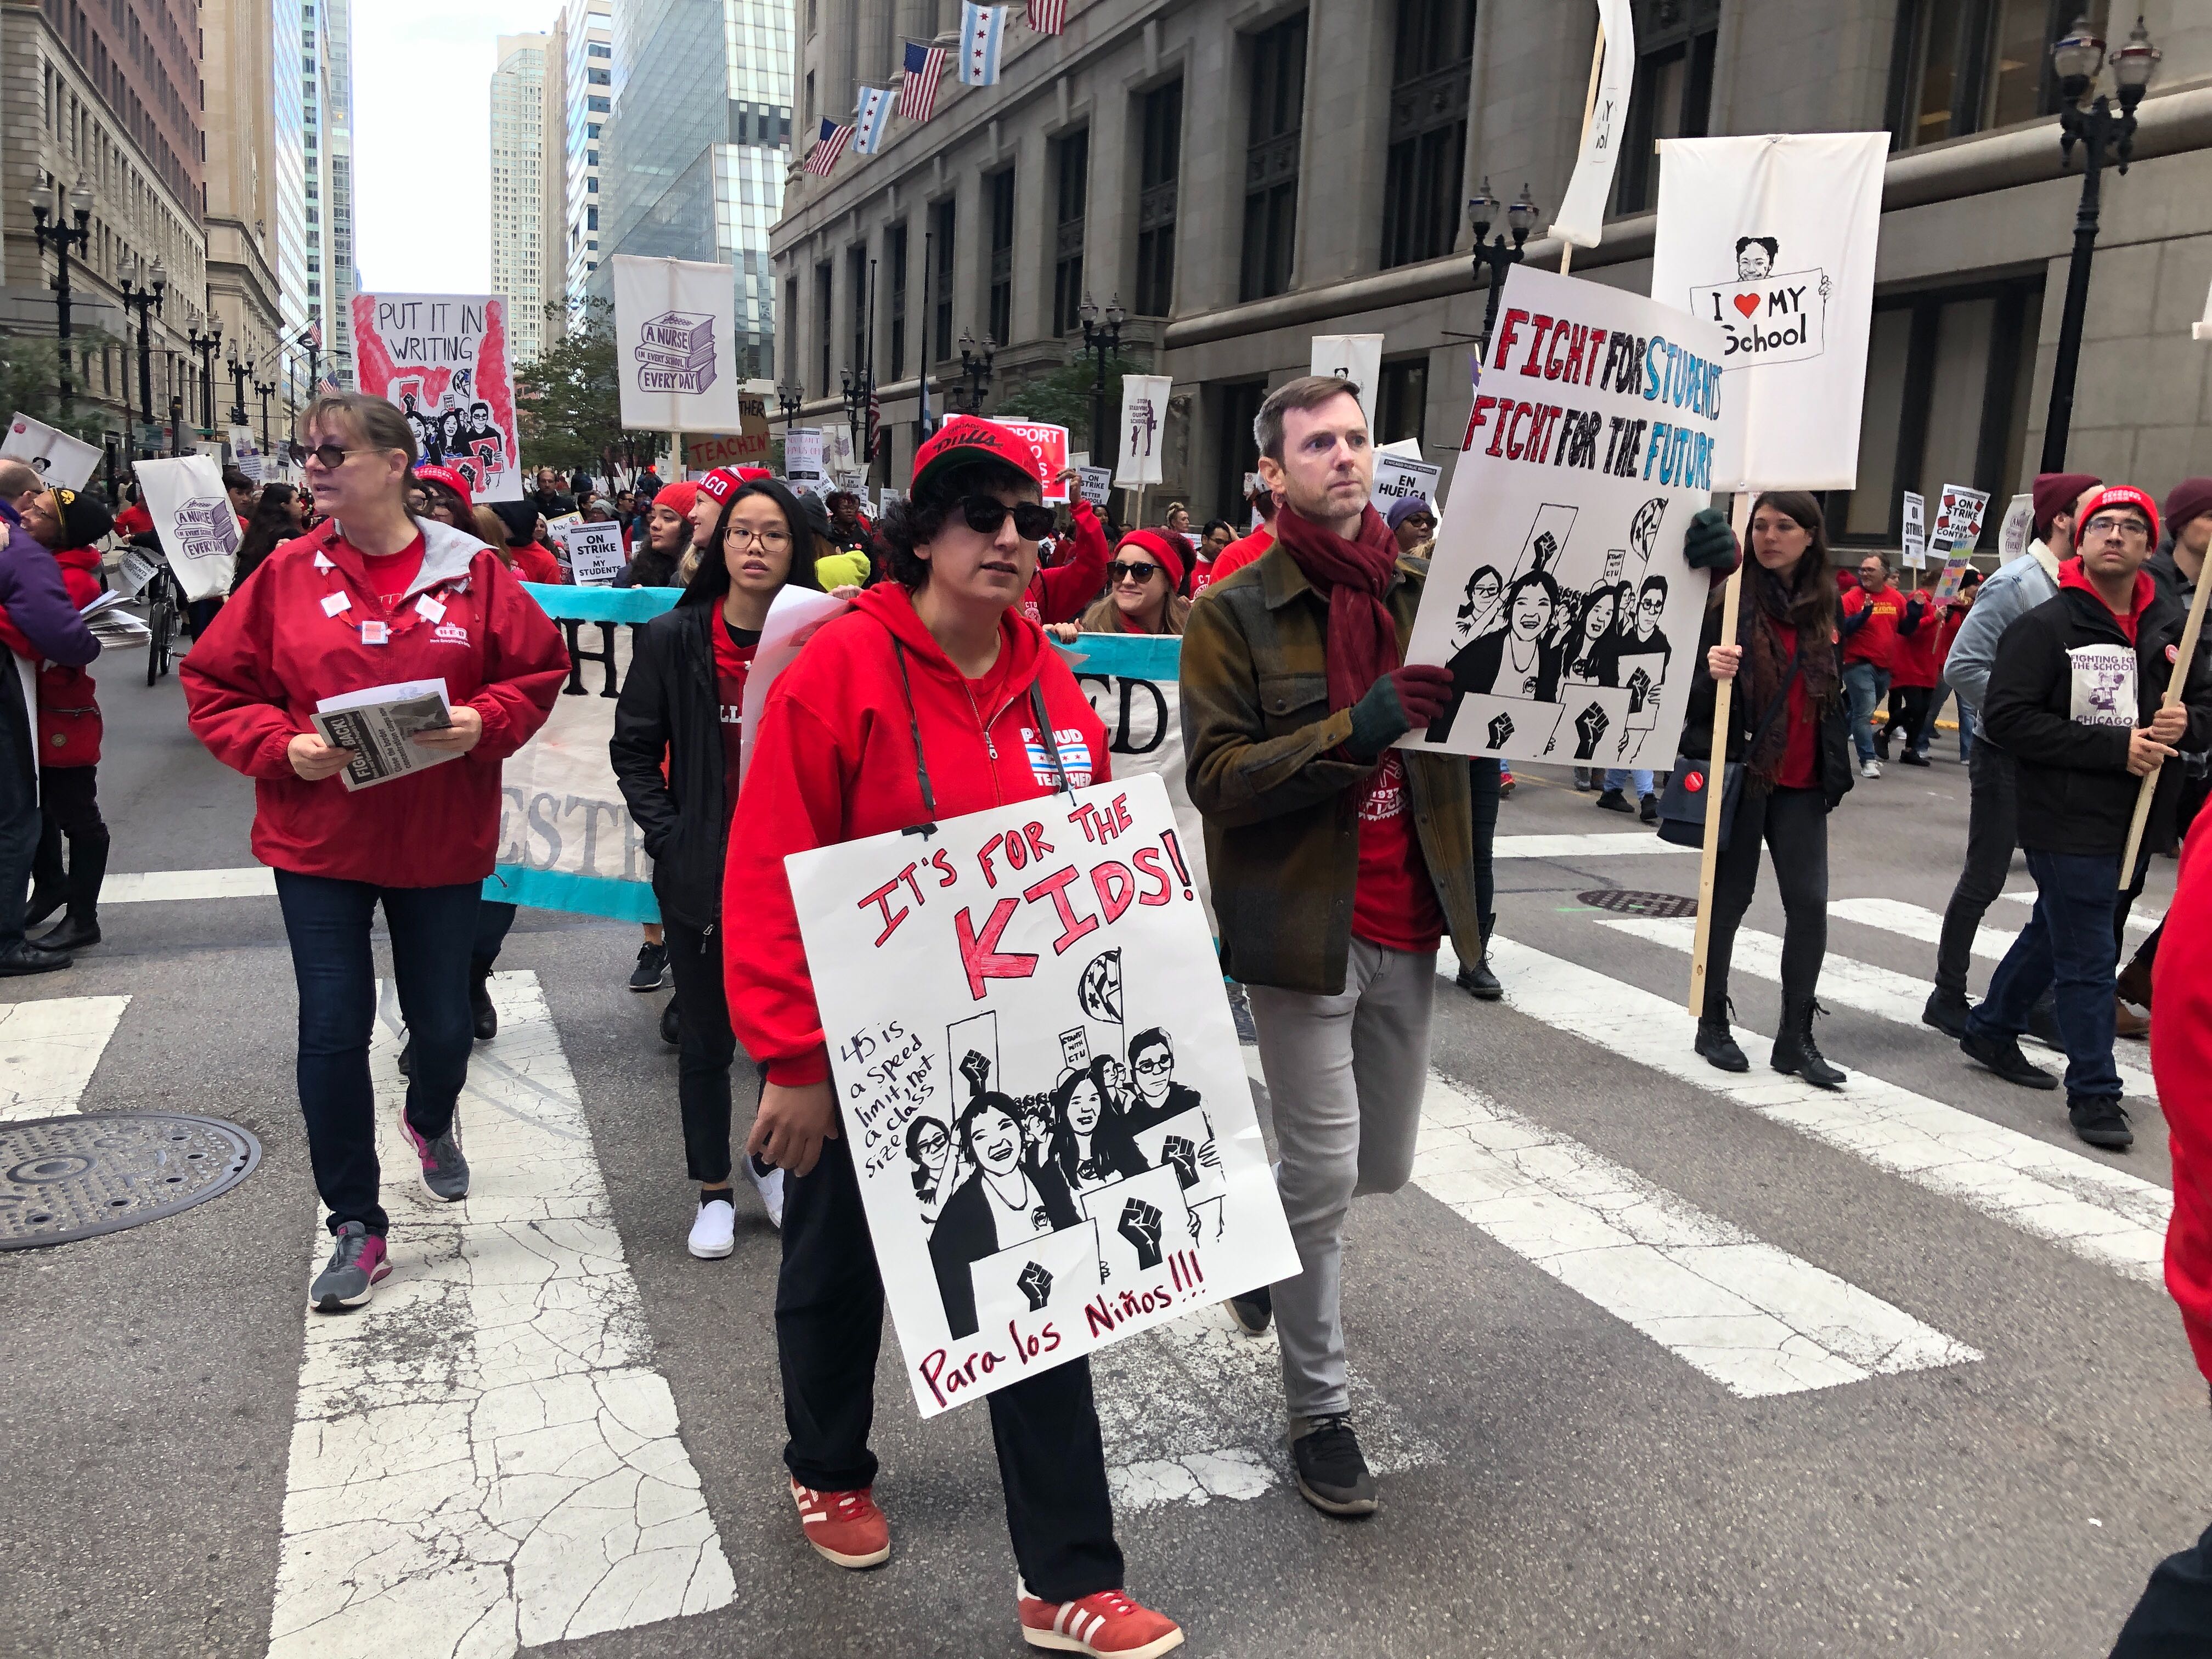 Protesters rallied downtown on Oct. 17, 2019, the first day of the strike by teachers and support staff against Chicago Public Schools.